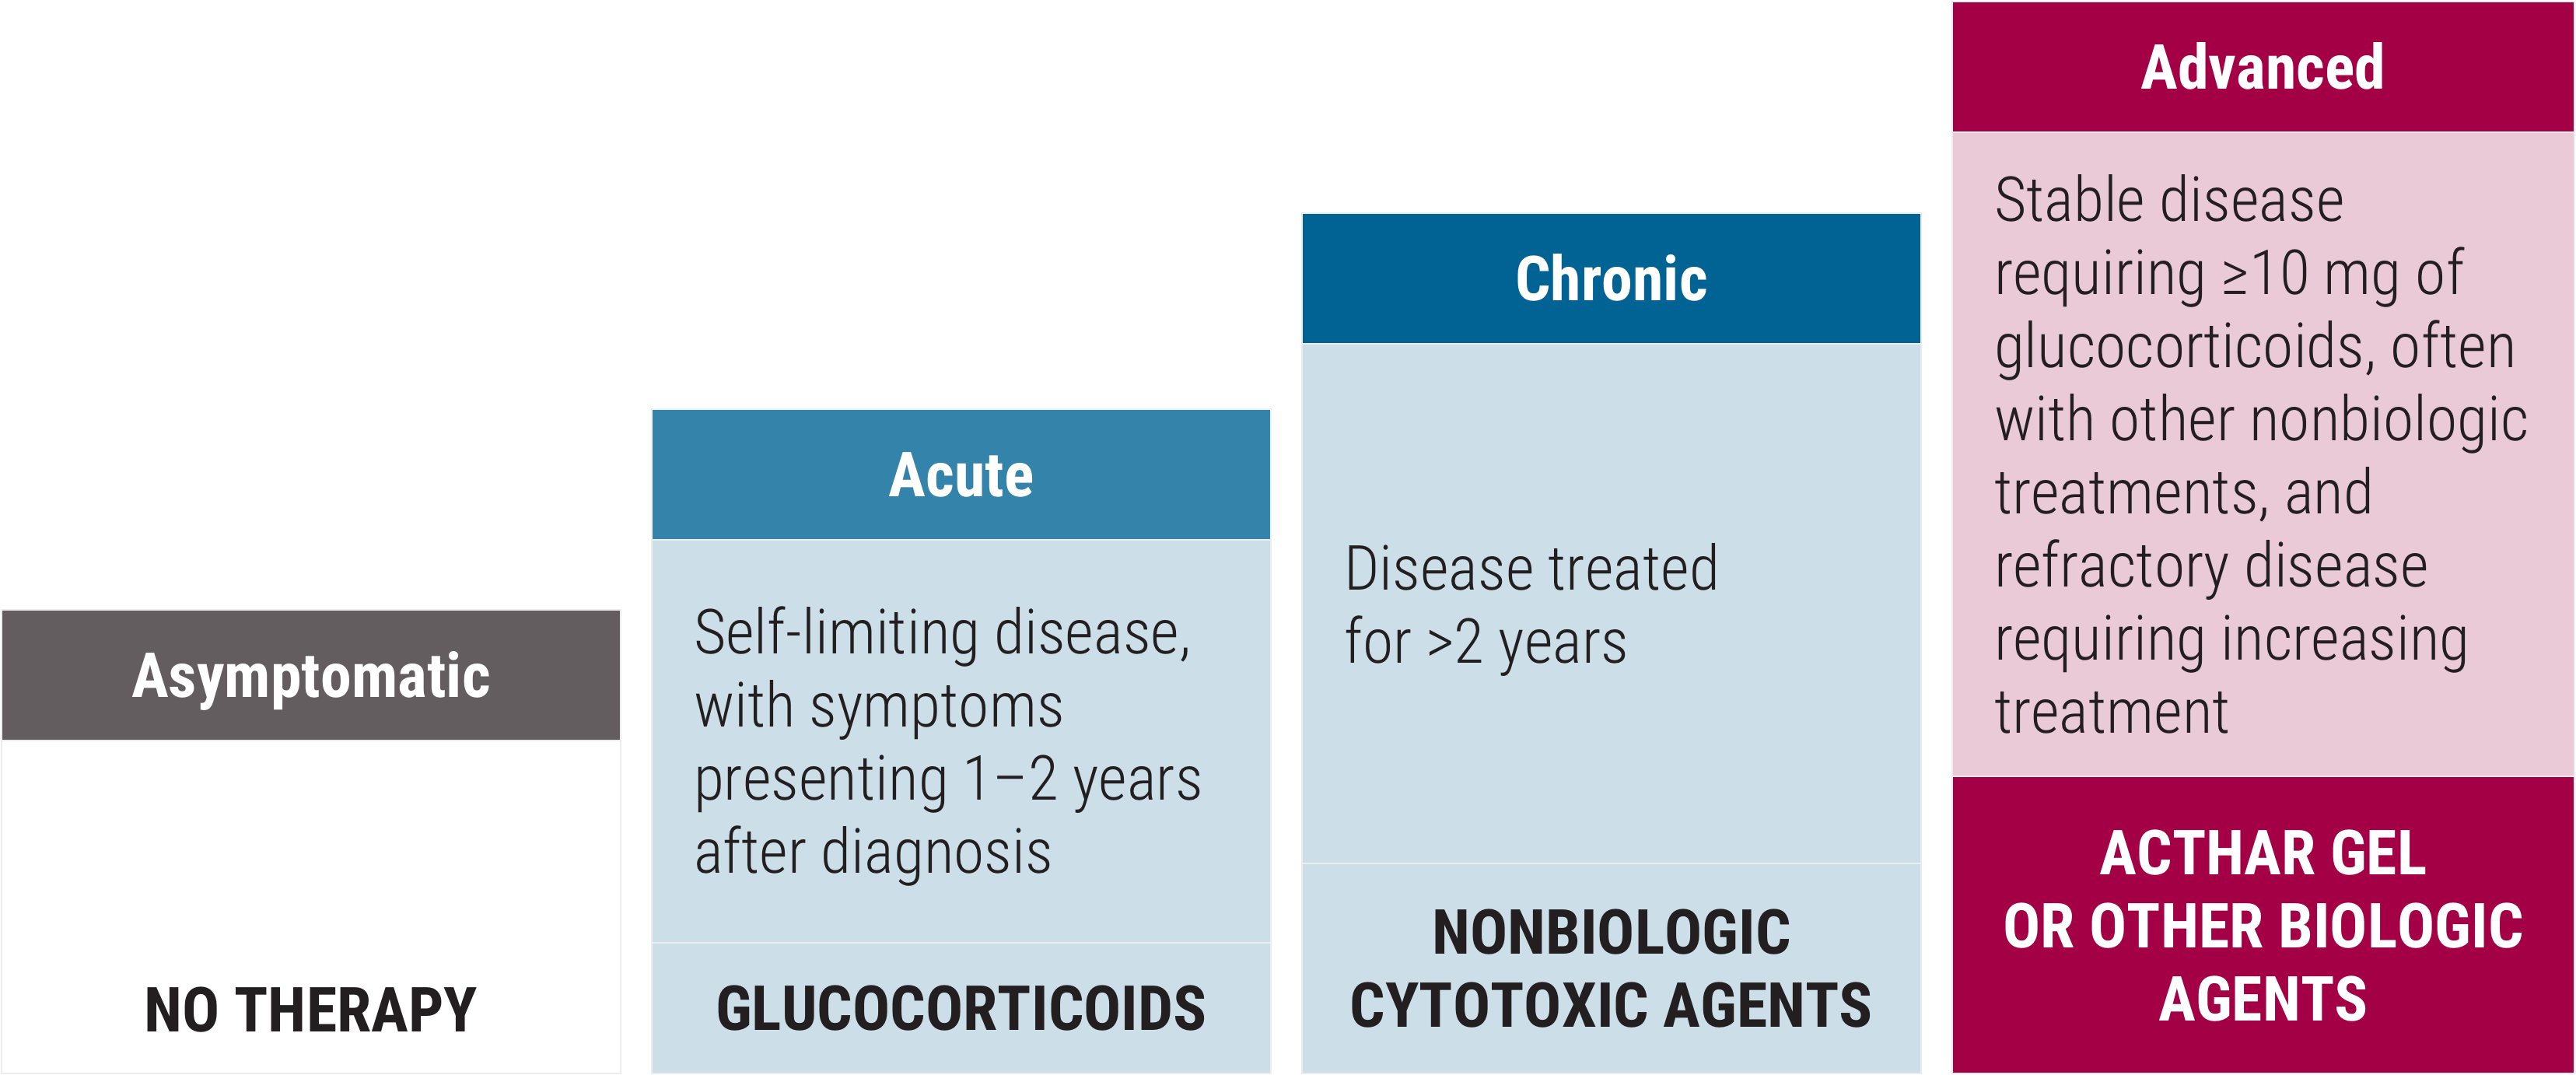 Treatment recommendations for asymptomatic, acute, chronic, and
                                                                    advanced patients